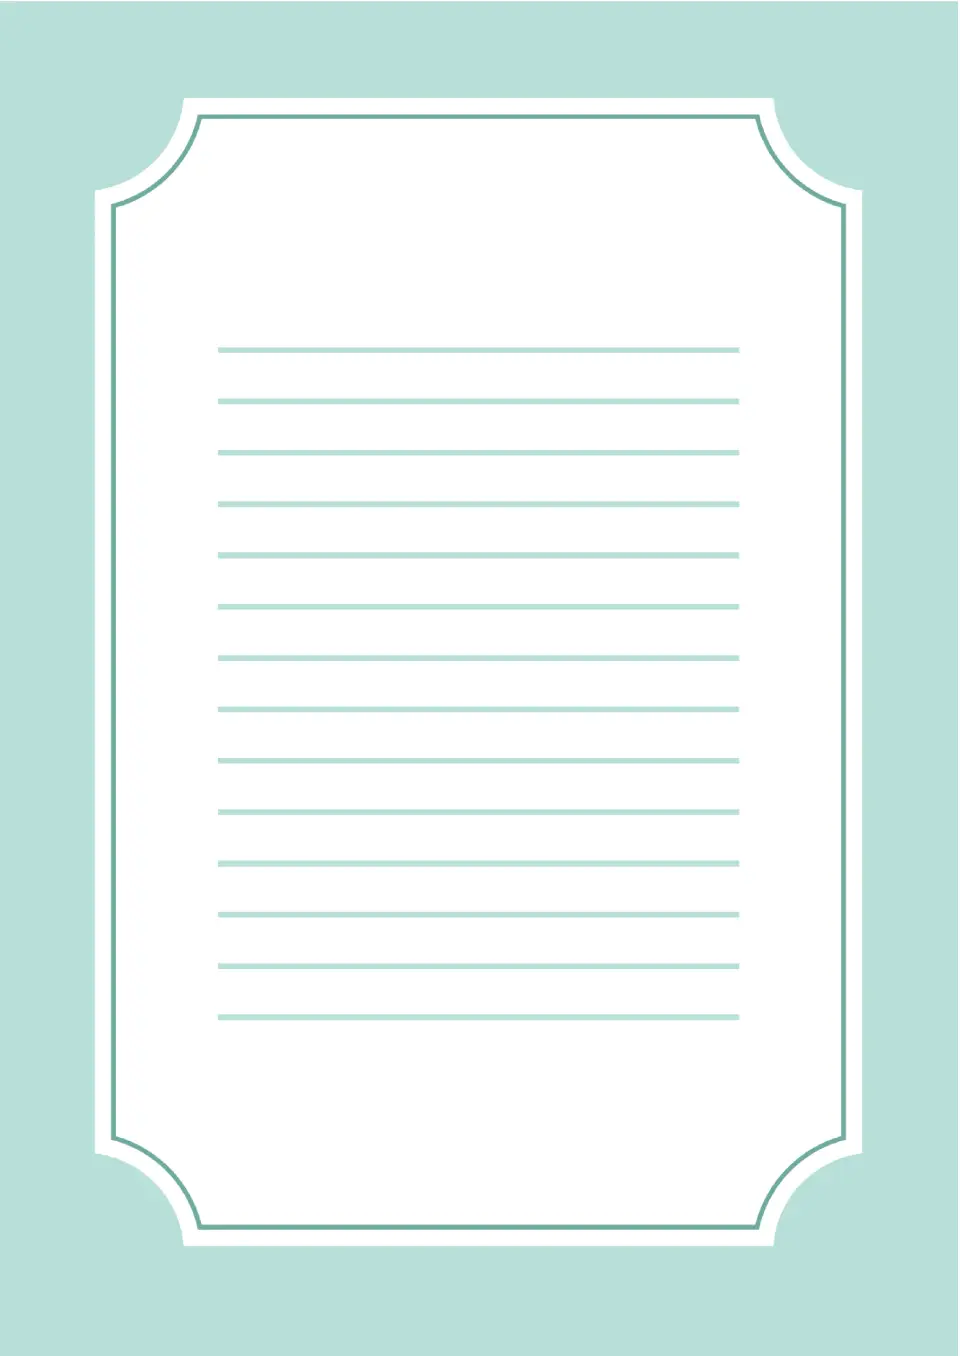 Daily journal template page 2 Template for Google Docs